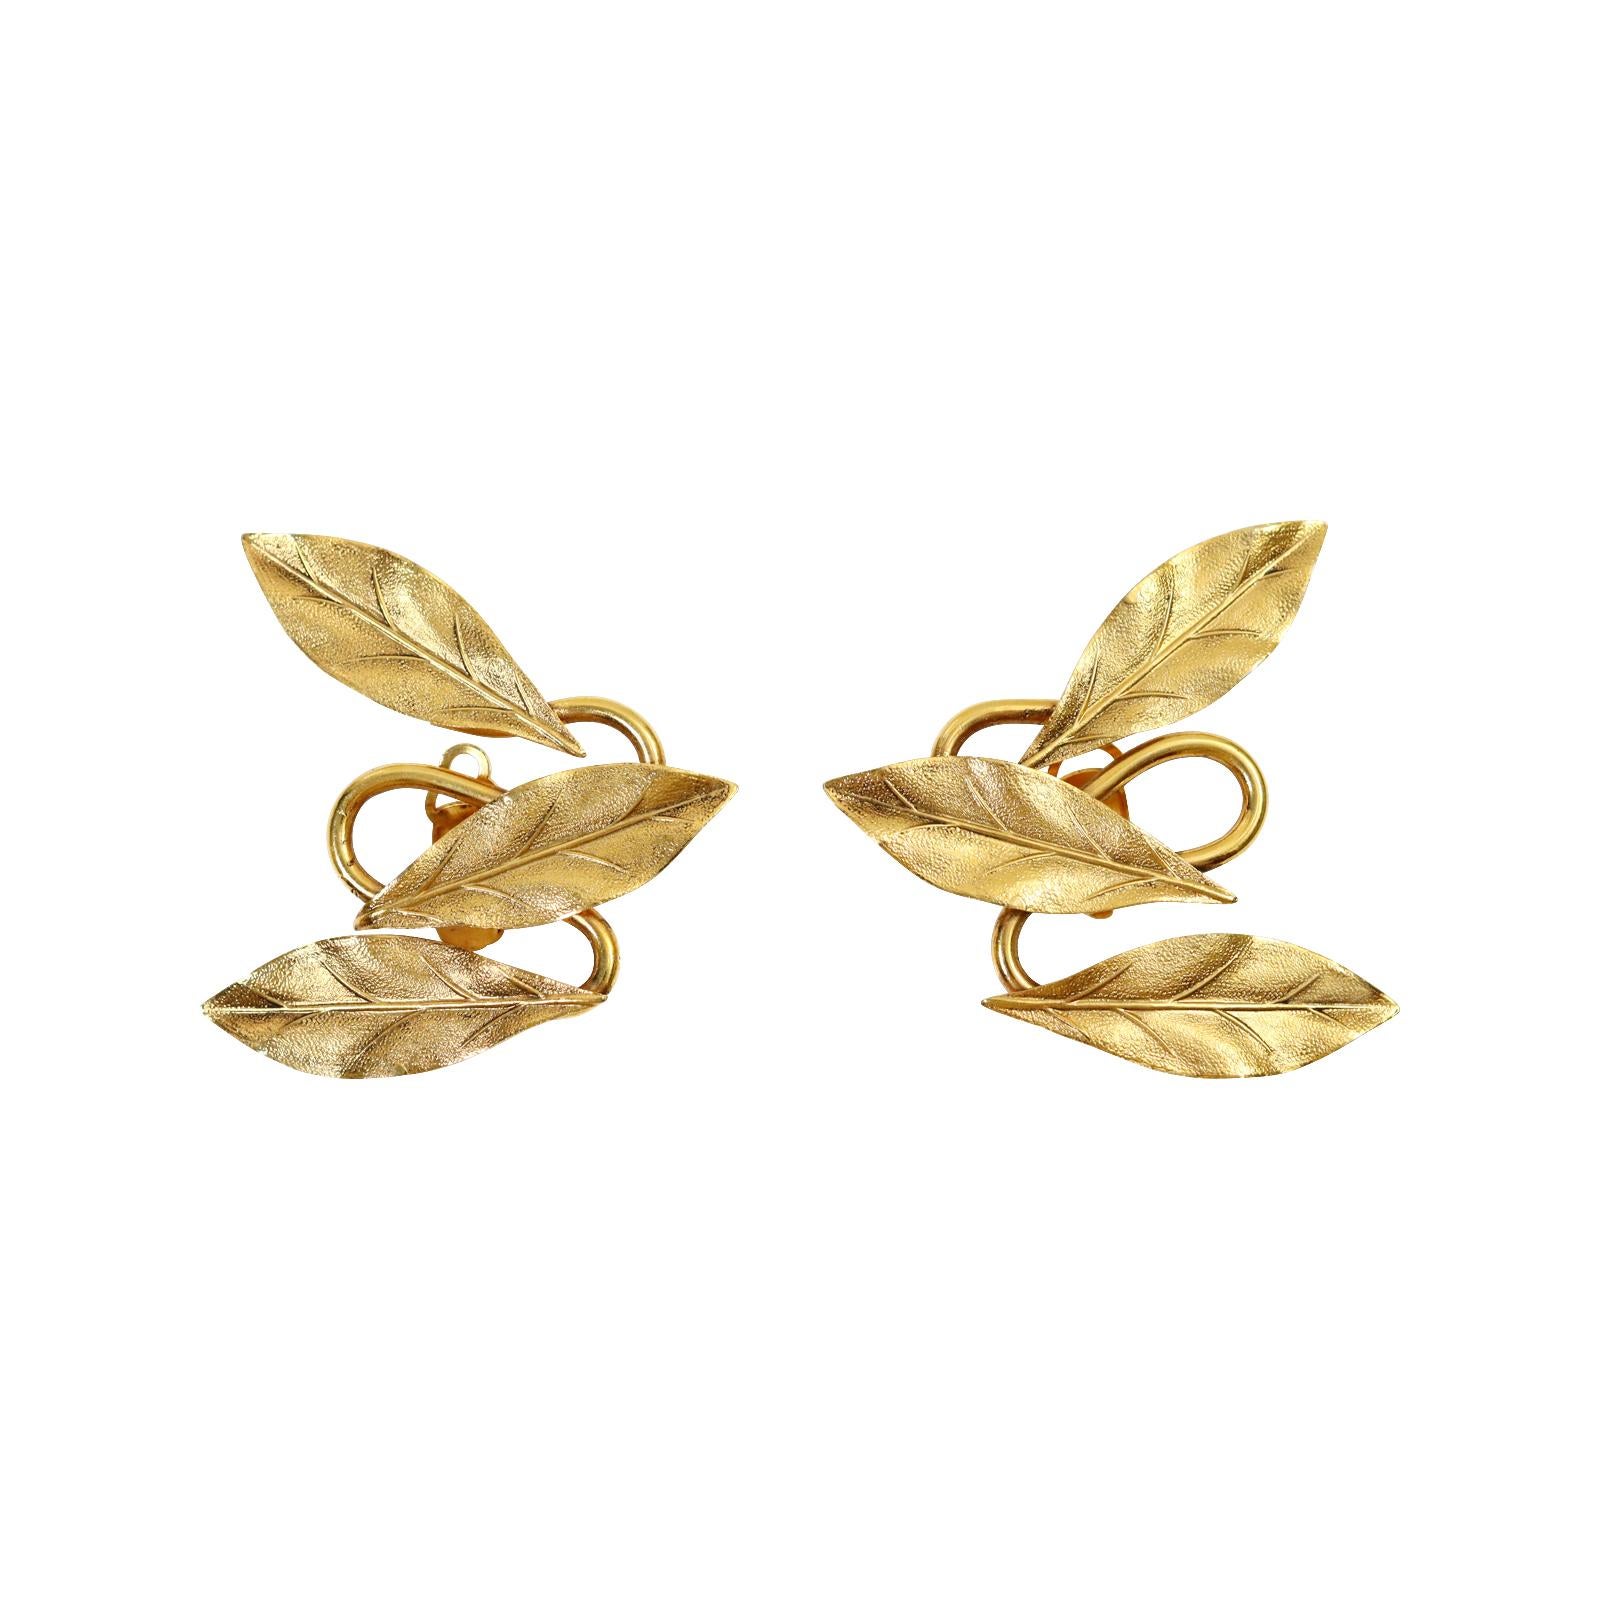 Vintage Gynuki Torimaru  Gold Tone Earrings Circa 1980s.  These are one of the most gorgeous pair of earrings I have in the collection.  They have ear appeal, not curb appeal.  They are 3 leaves that are together that when applied to the ear are